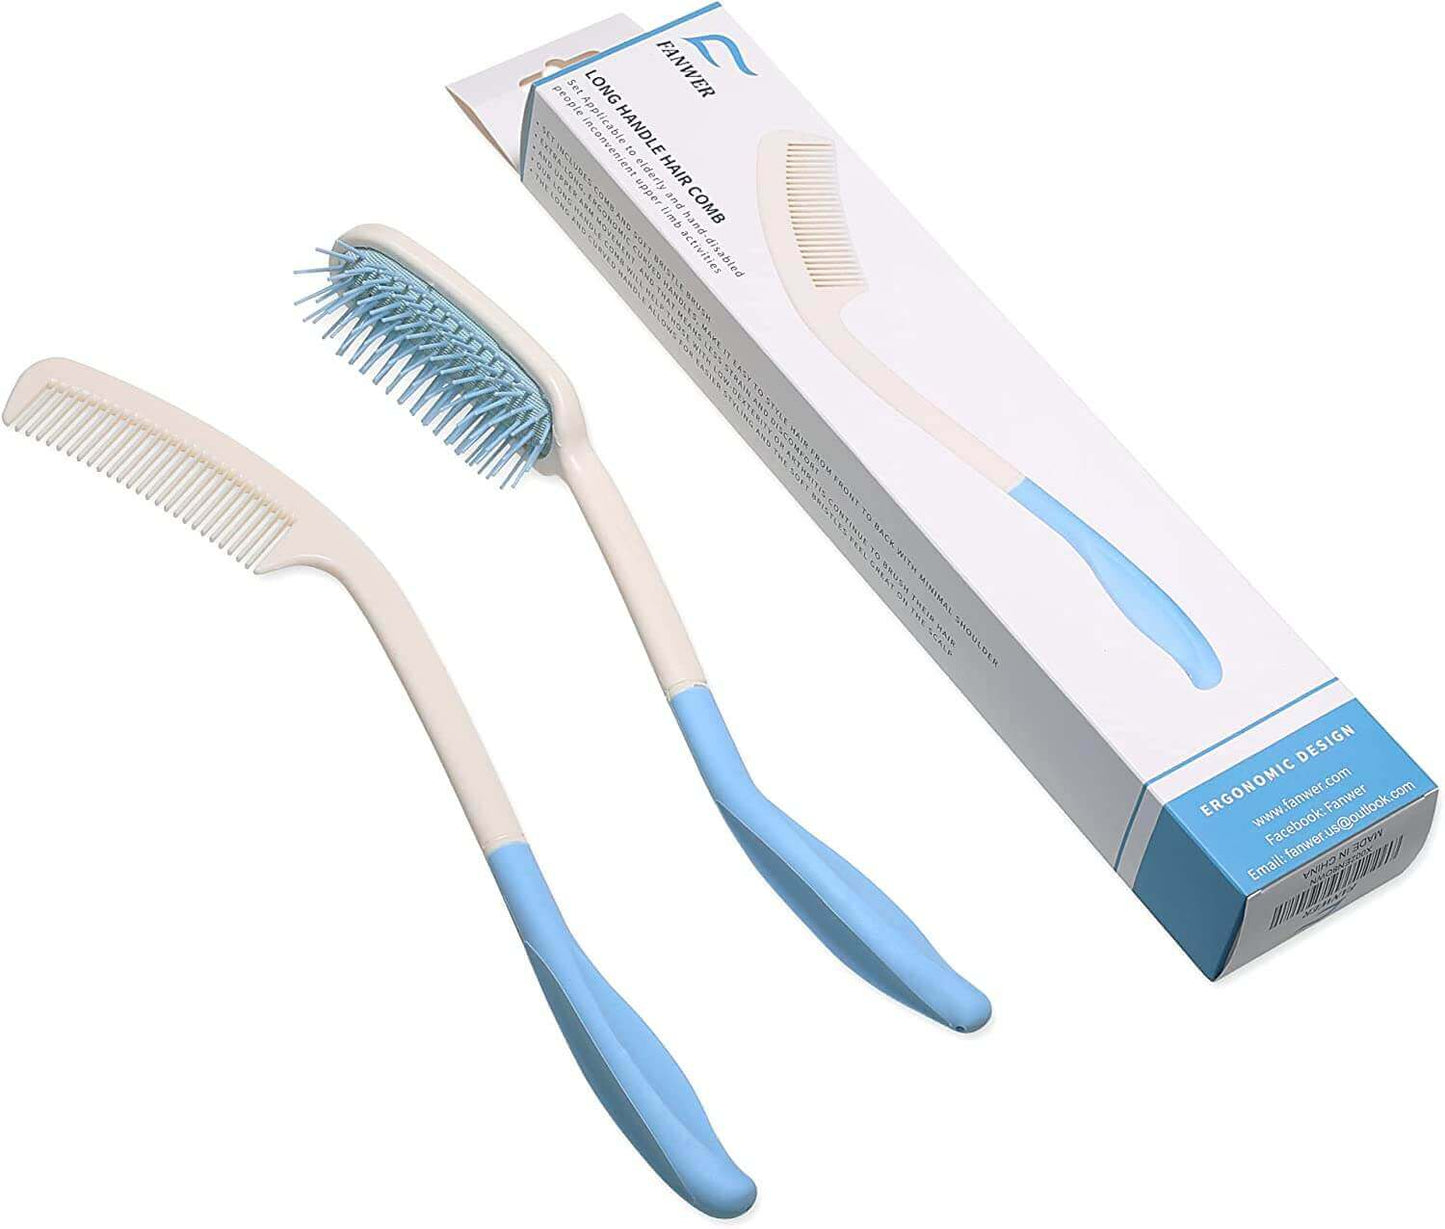 Fanwer's long-handle hair brush and comb, the package the products